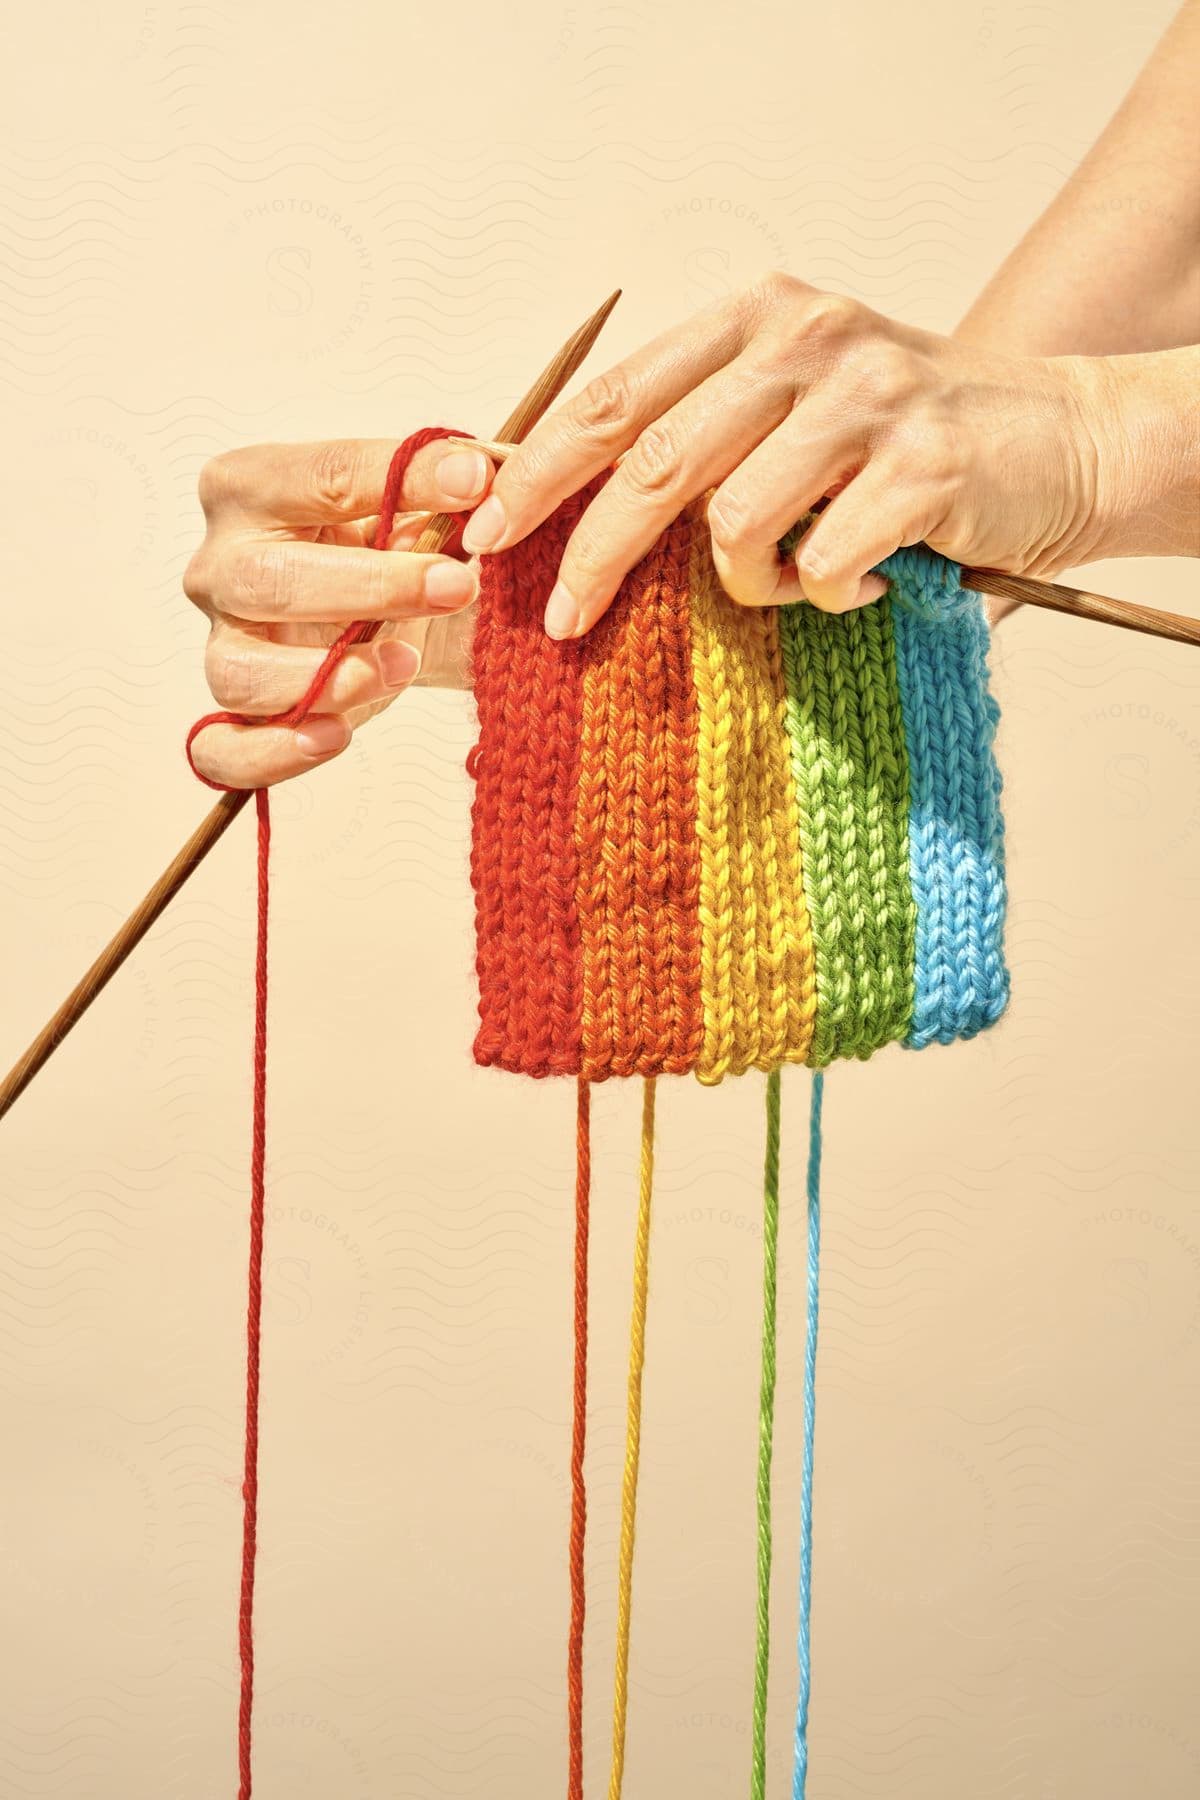 A person knitting with two sticks and wool